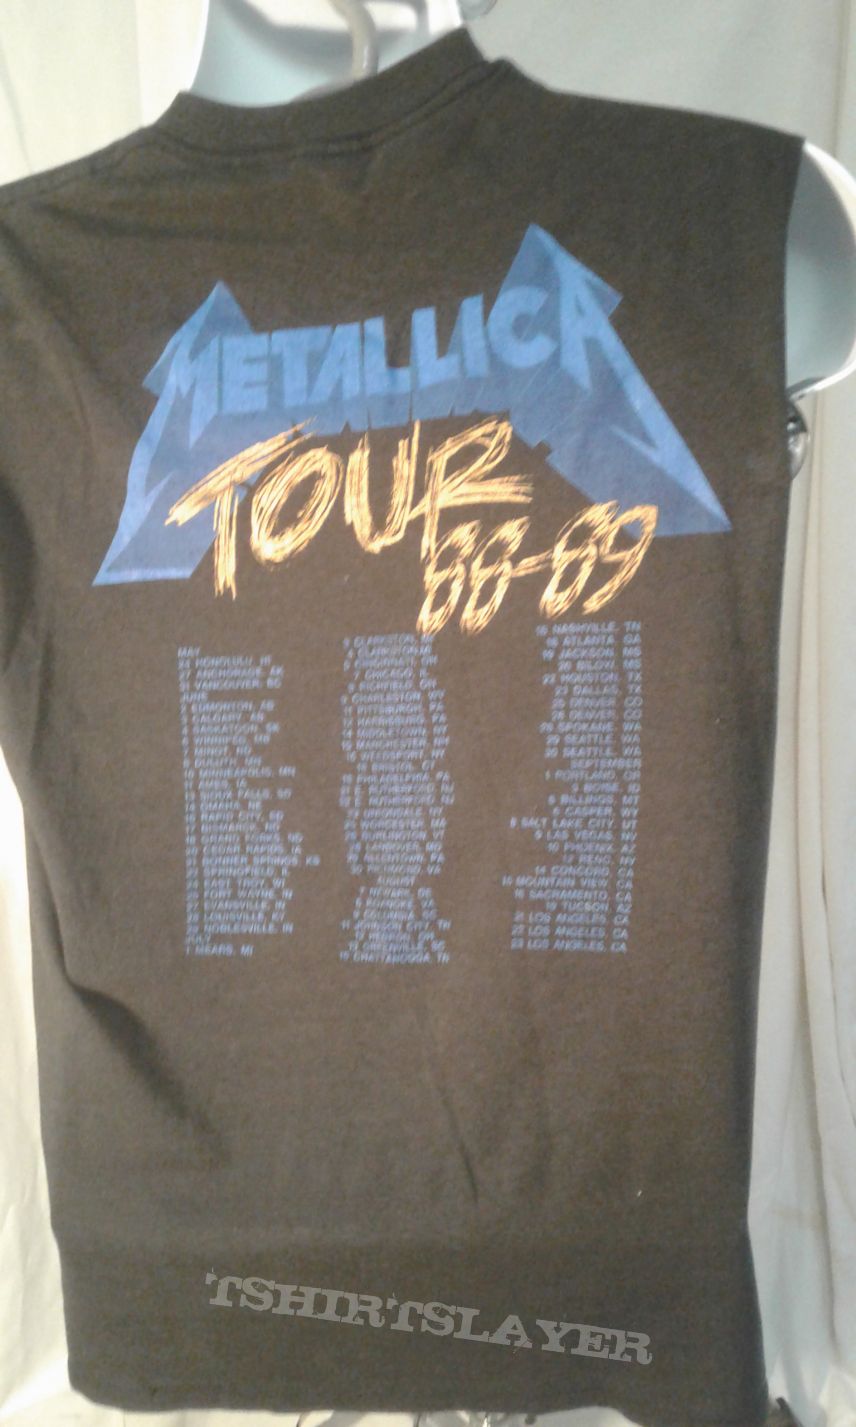 Metallica My Justice for All